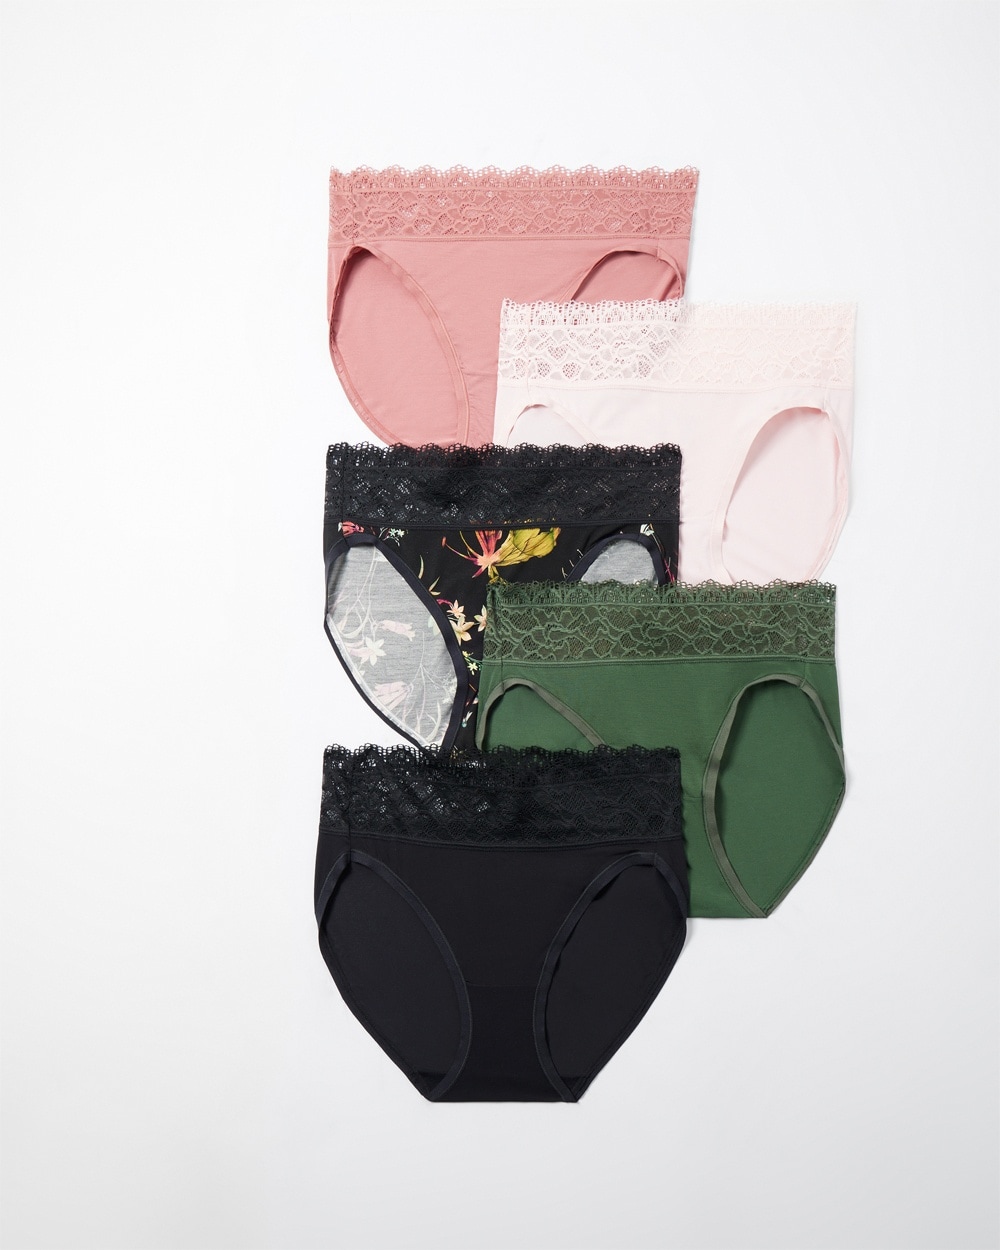 Soma Embraceable Lace Thong 6 Pack, Multi